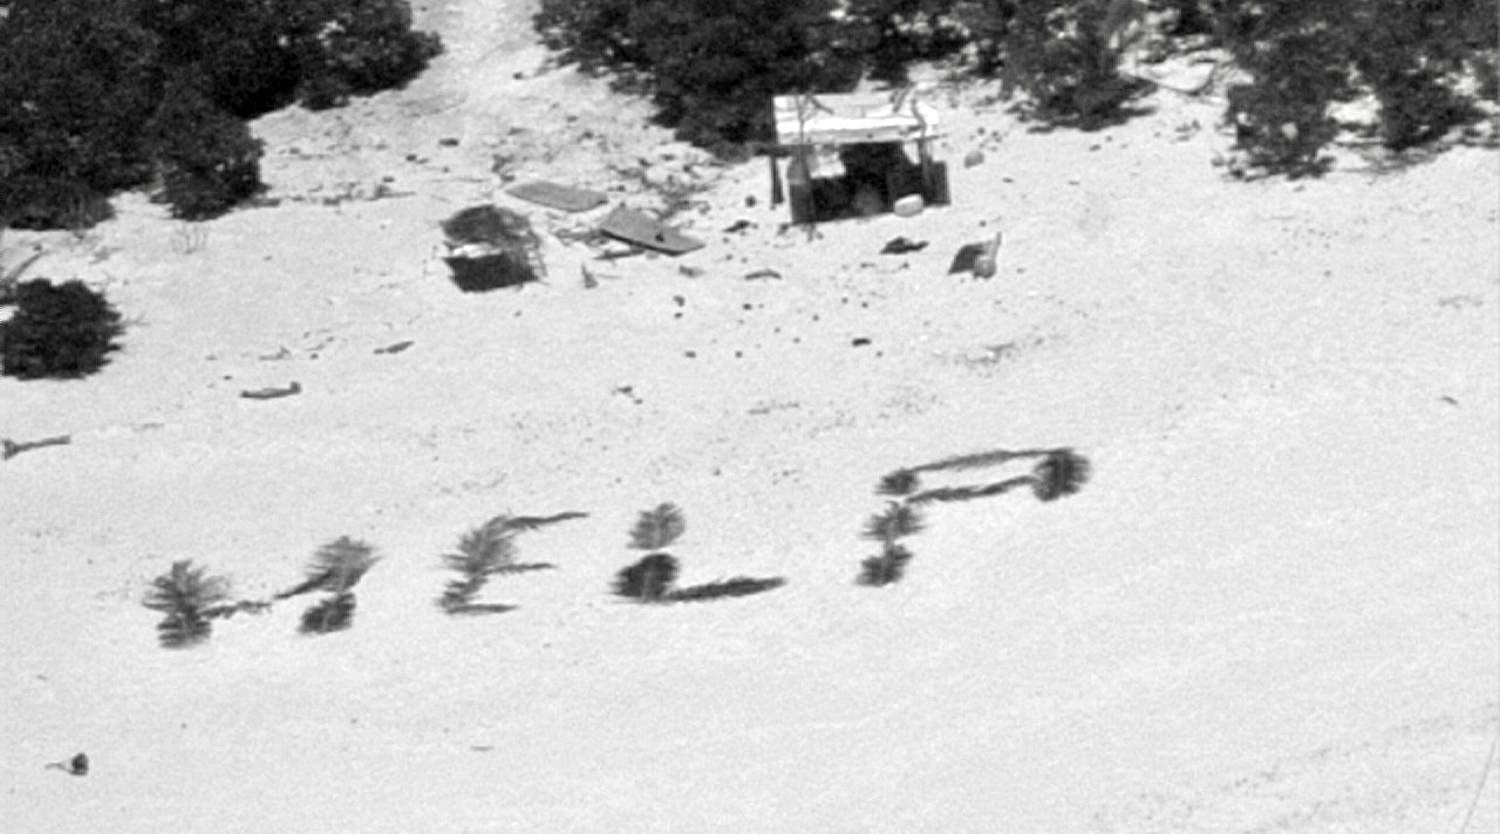 Stranded sailors rescued from tiny Pacific island after making 'HELP' sign with leaves